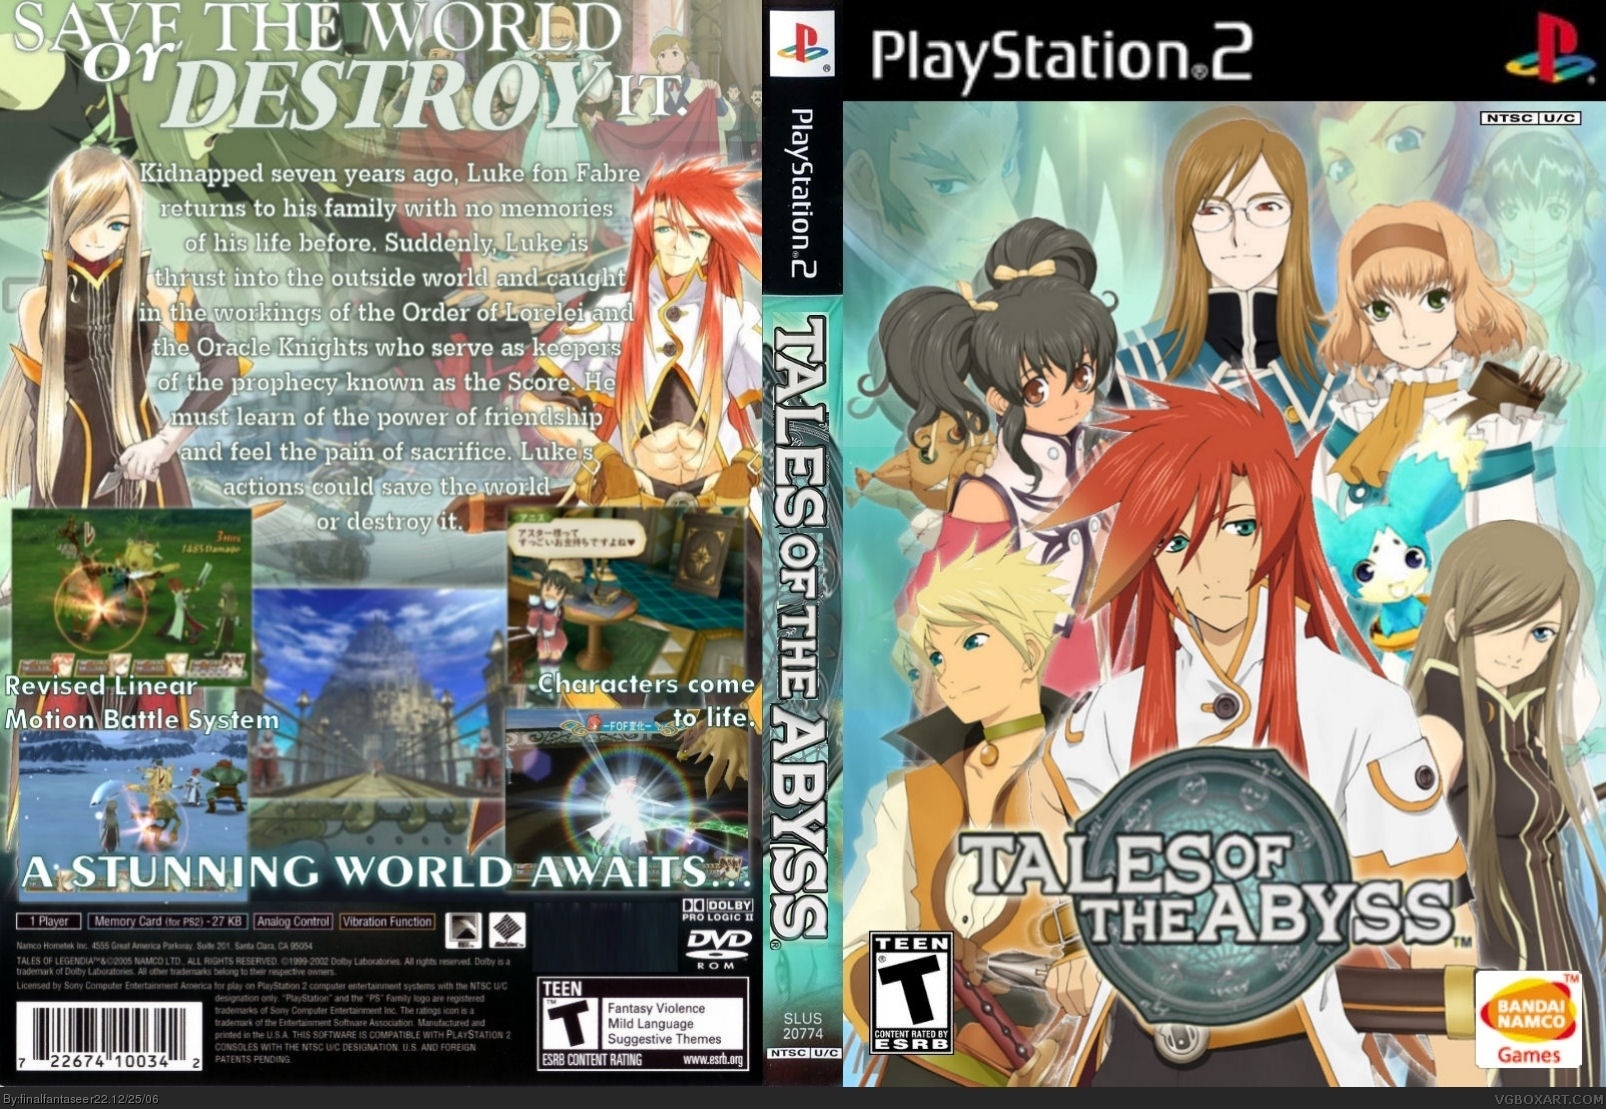 Blast from the Past: Tales of the Abyss (PS2) - PlayStation Blast